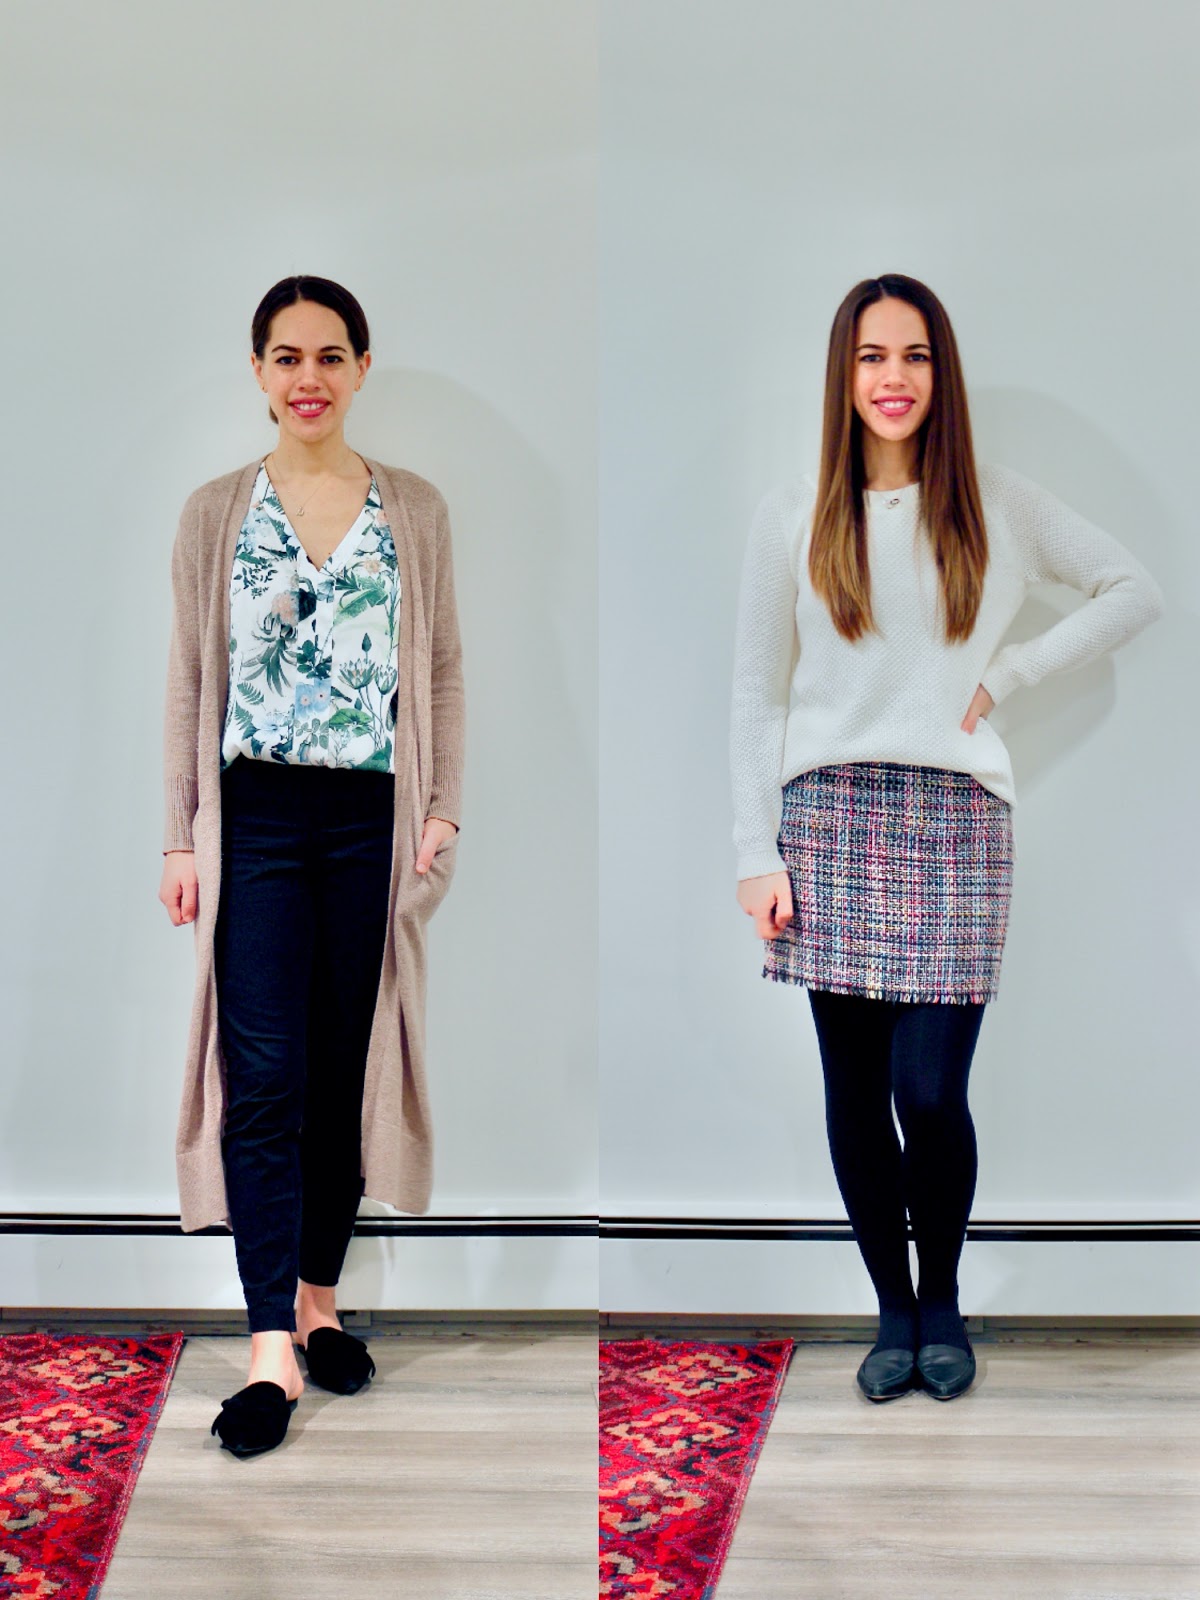 Jules in Flats - February Outfits Week 1 (Business Casual Winter Workwear on a Budget)